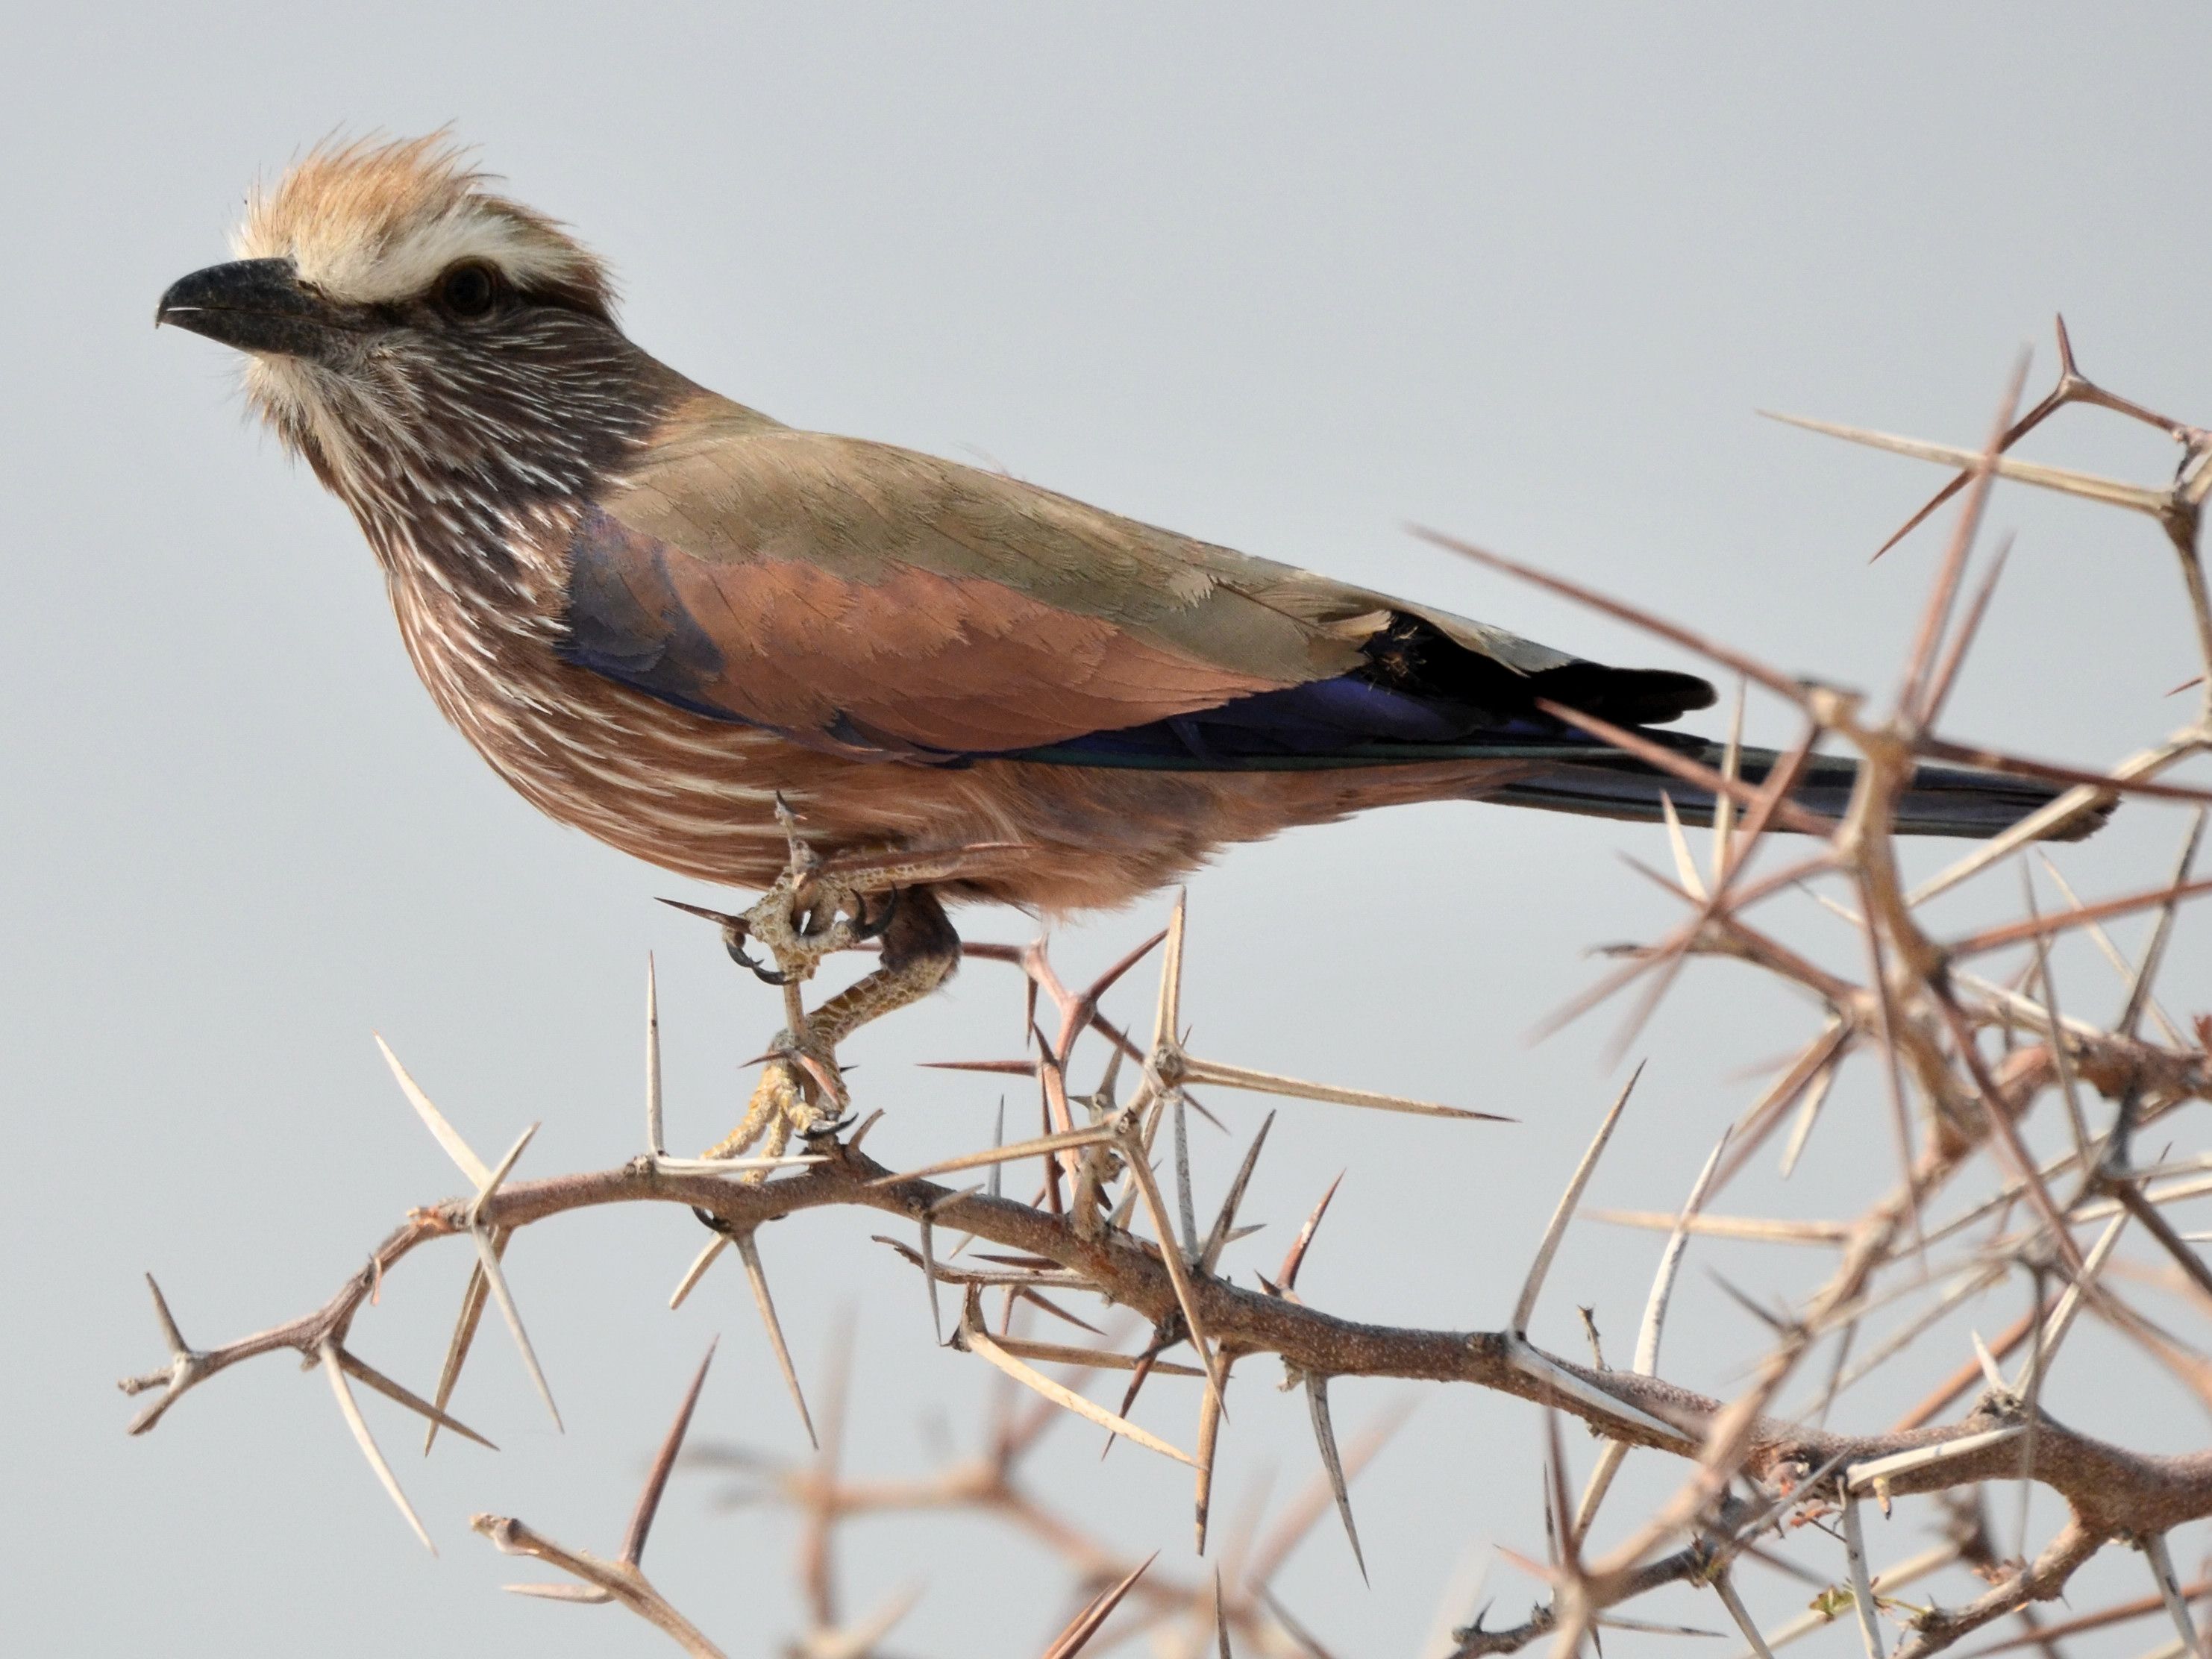 Click picture to see more Rufous-crowned (Purple) Rollers.